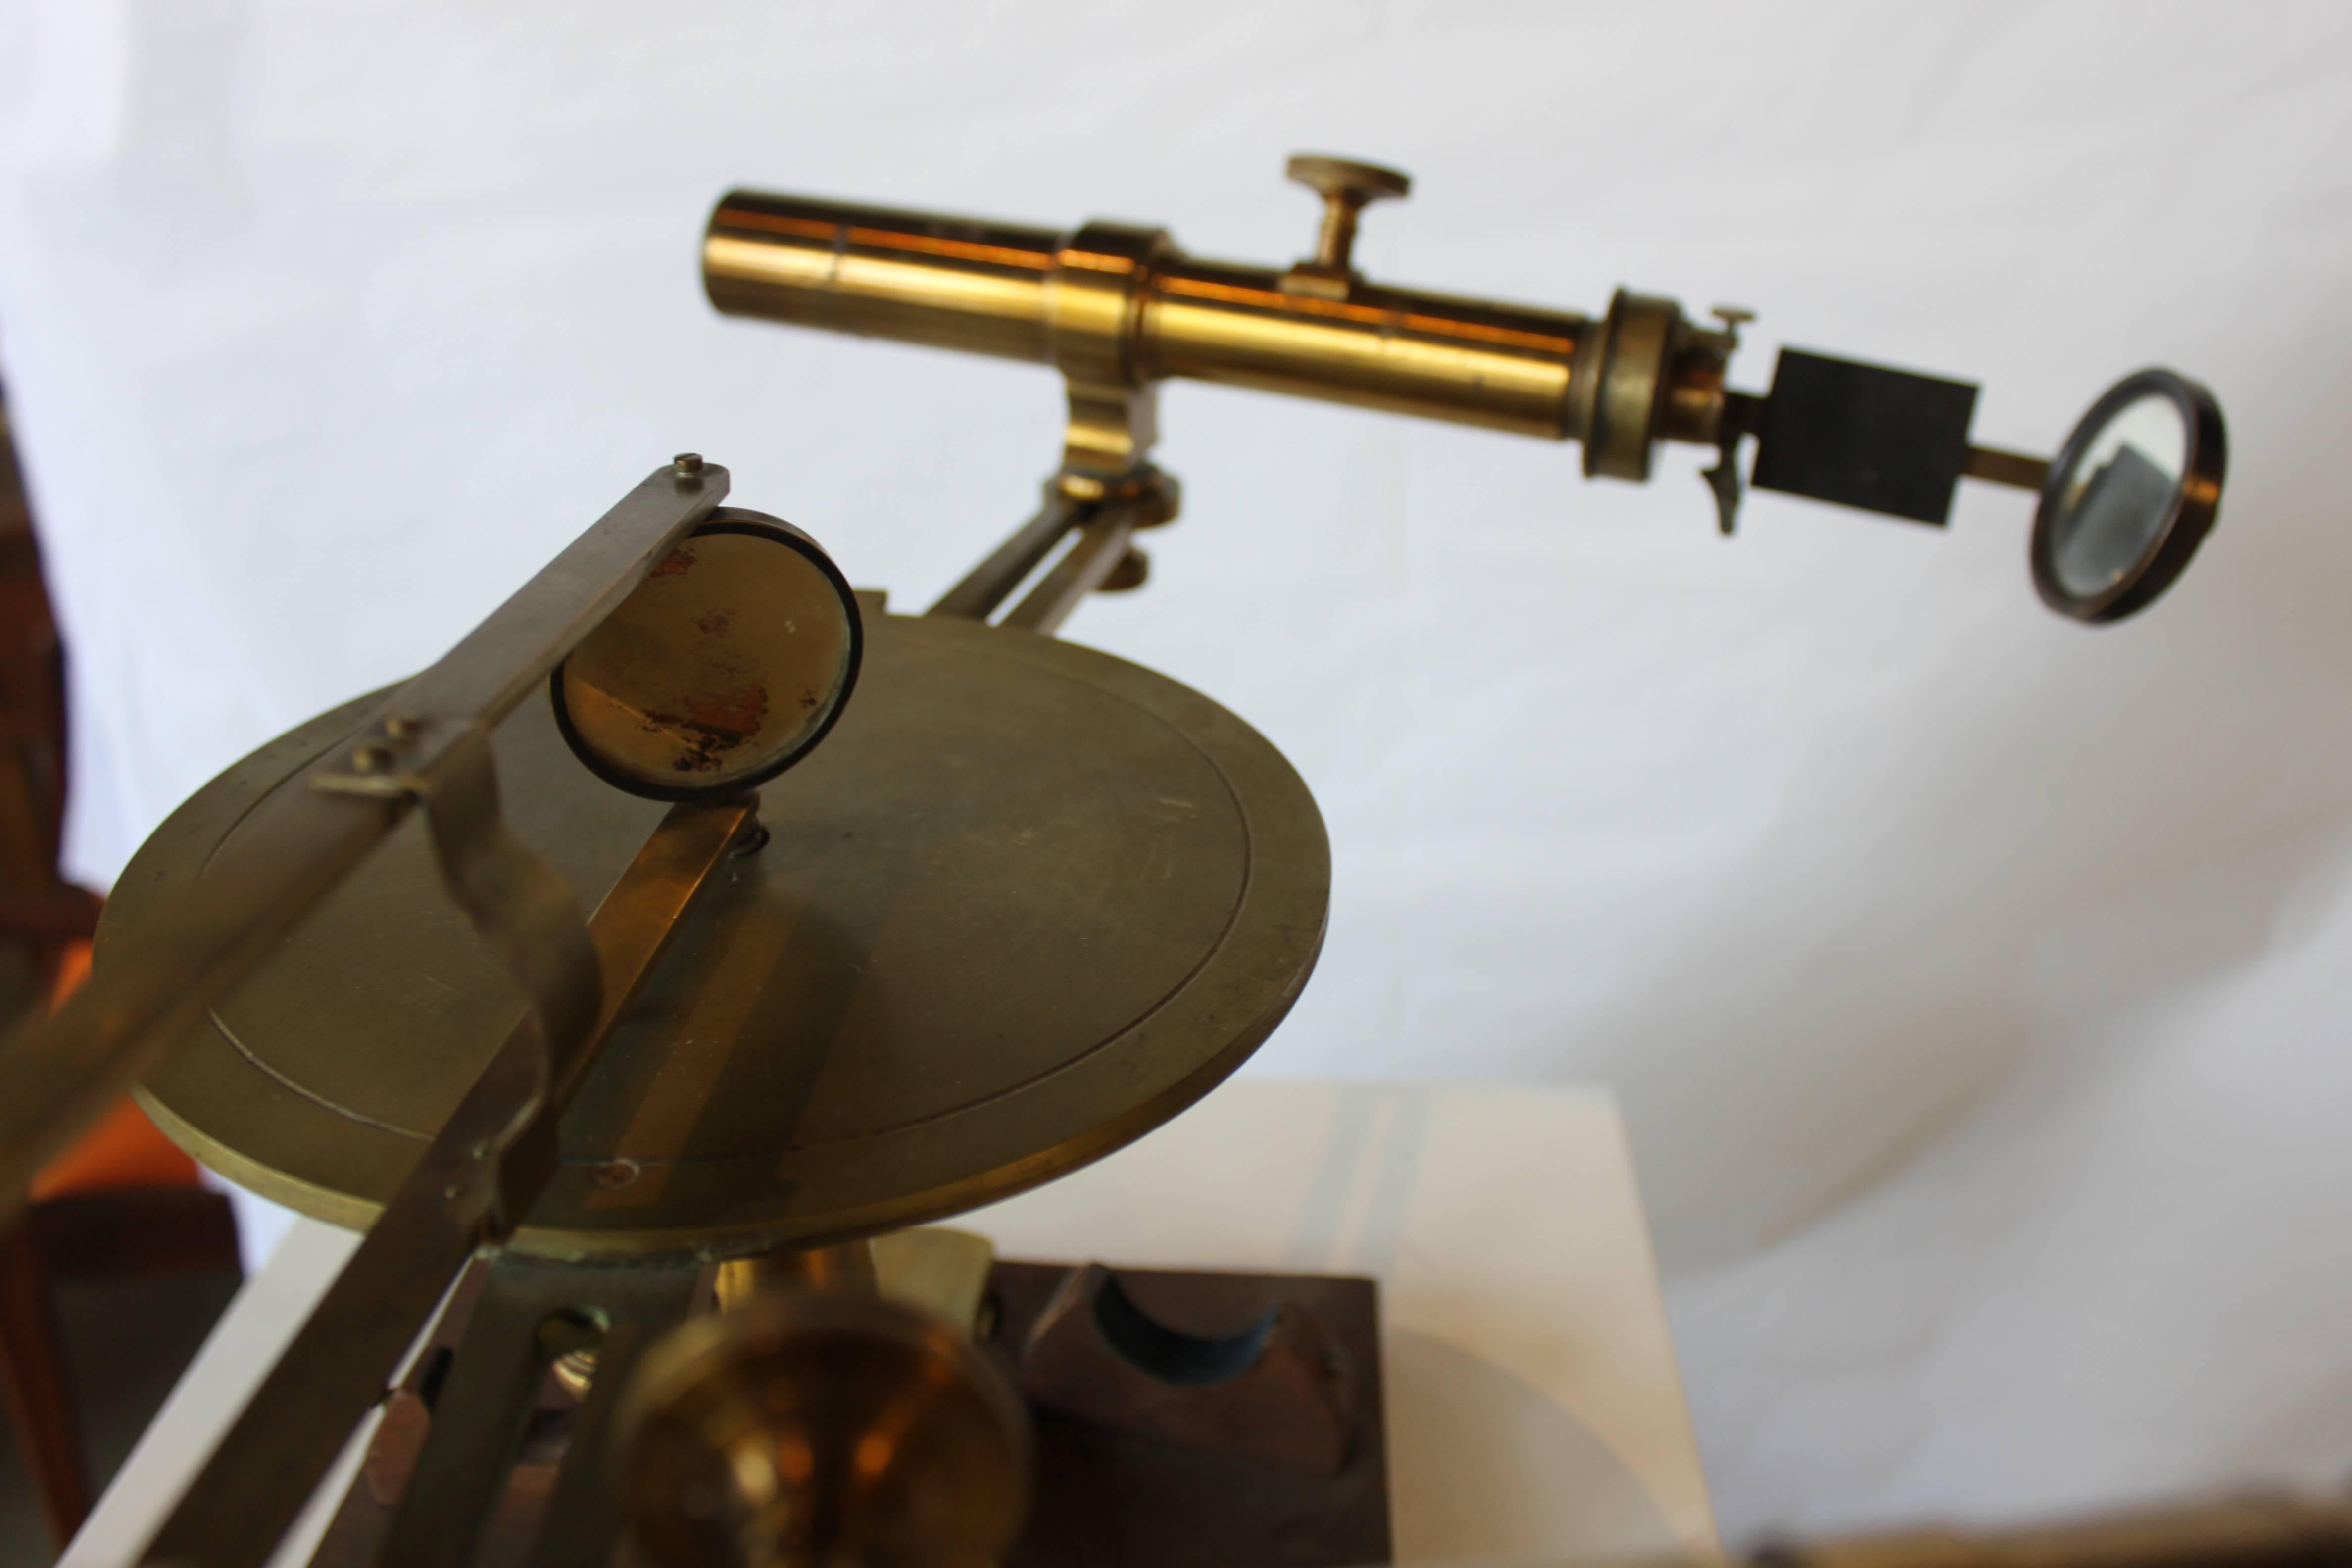 Double horizontal microscope on goniometer stand with case by Hall & Benjamin, NY. circa 1880. Ex. Elli Buk Museum Collection, NYC.